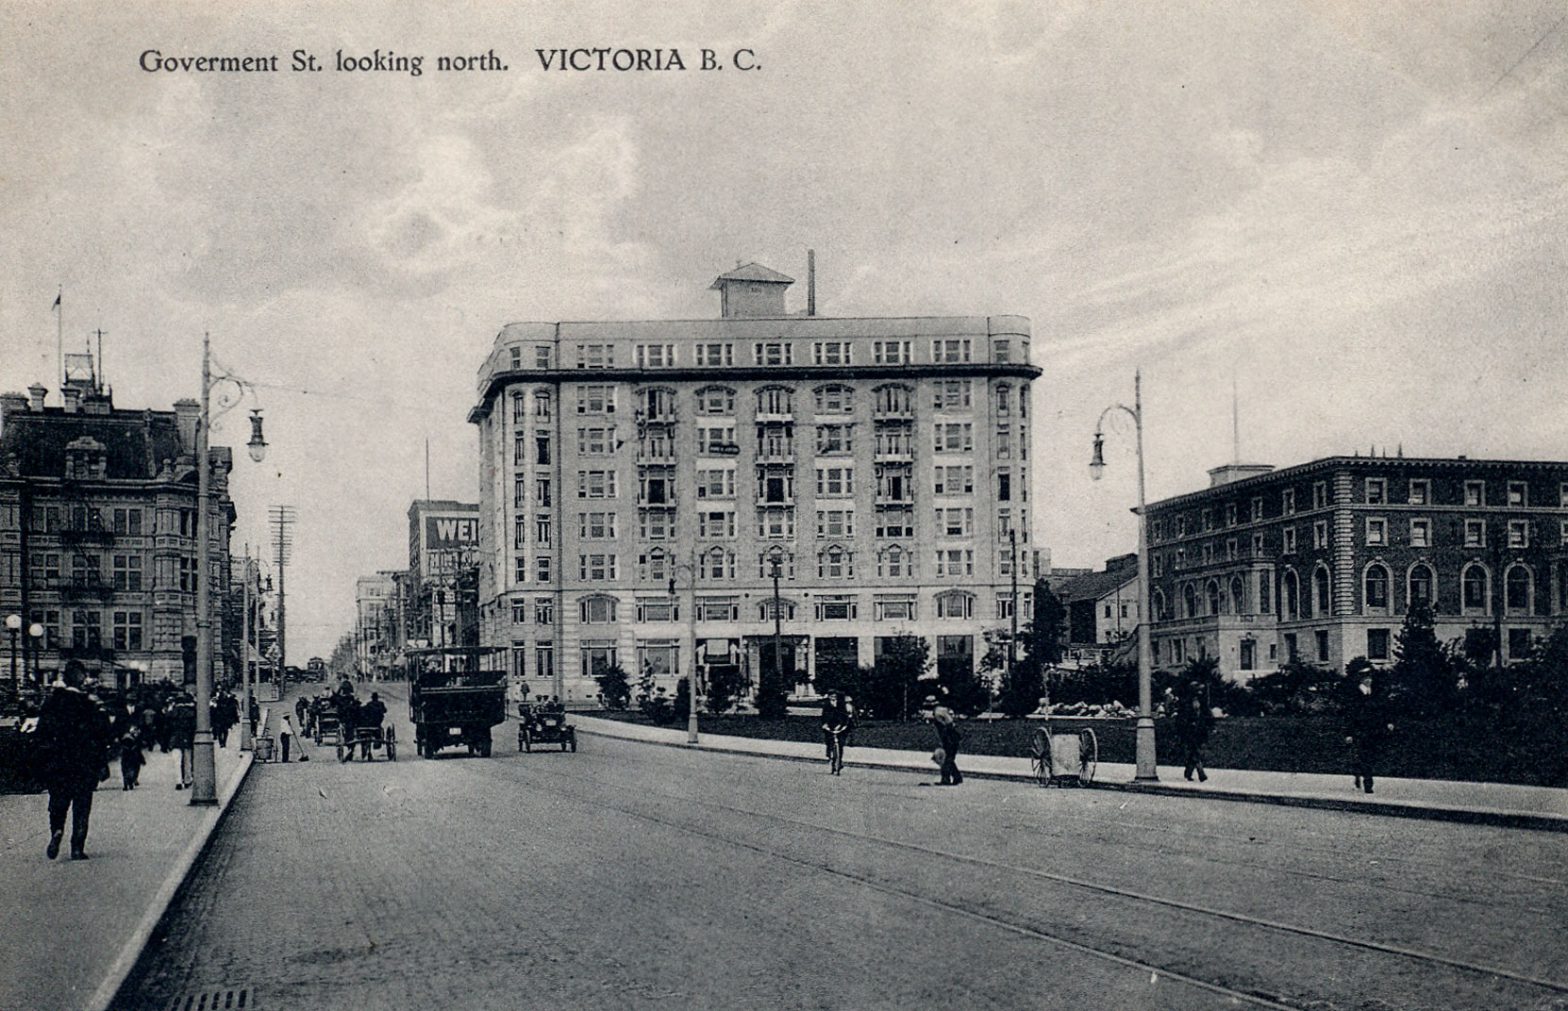 The Belmont Building (center) and the Union Club (right), circa 1920. Robert Butchart's office was on the third floor of the Belmont Building and he was a member of the Union Club. (Author's collection)